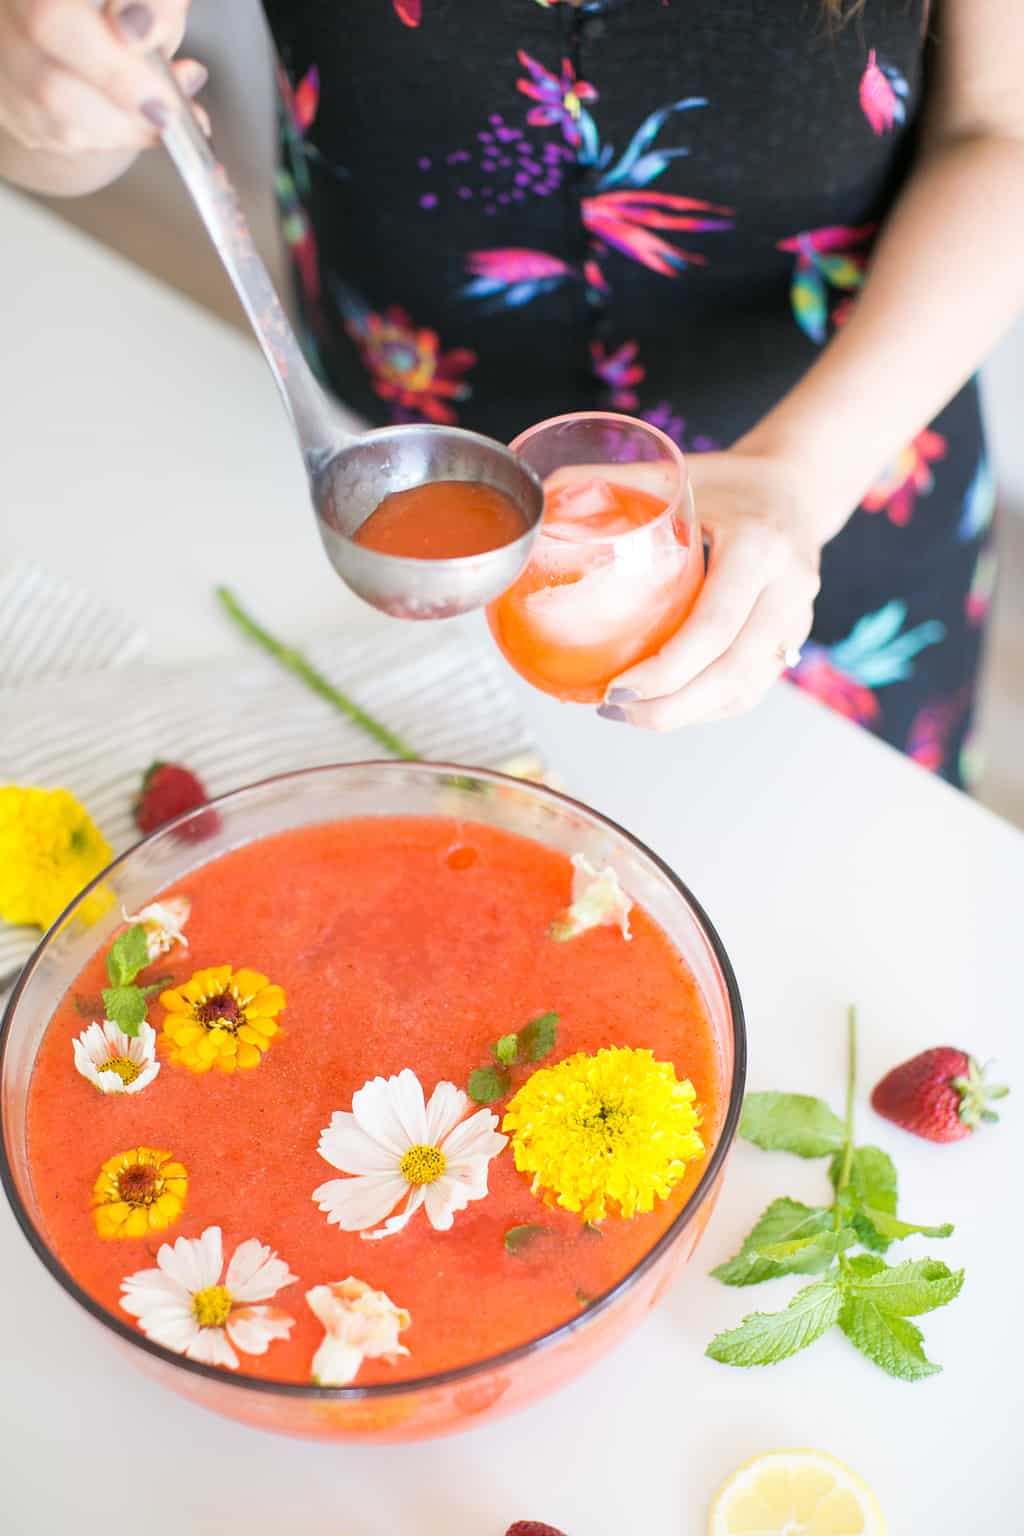 Fresh-Squeezed Strawberry Lemonade with Rosewater and Edible Flowers